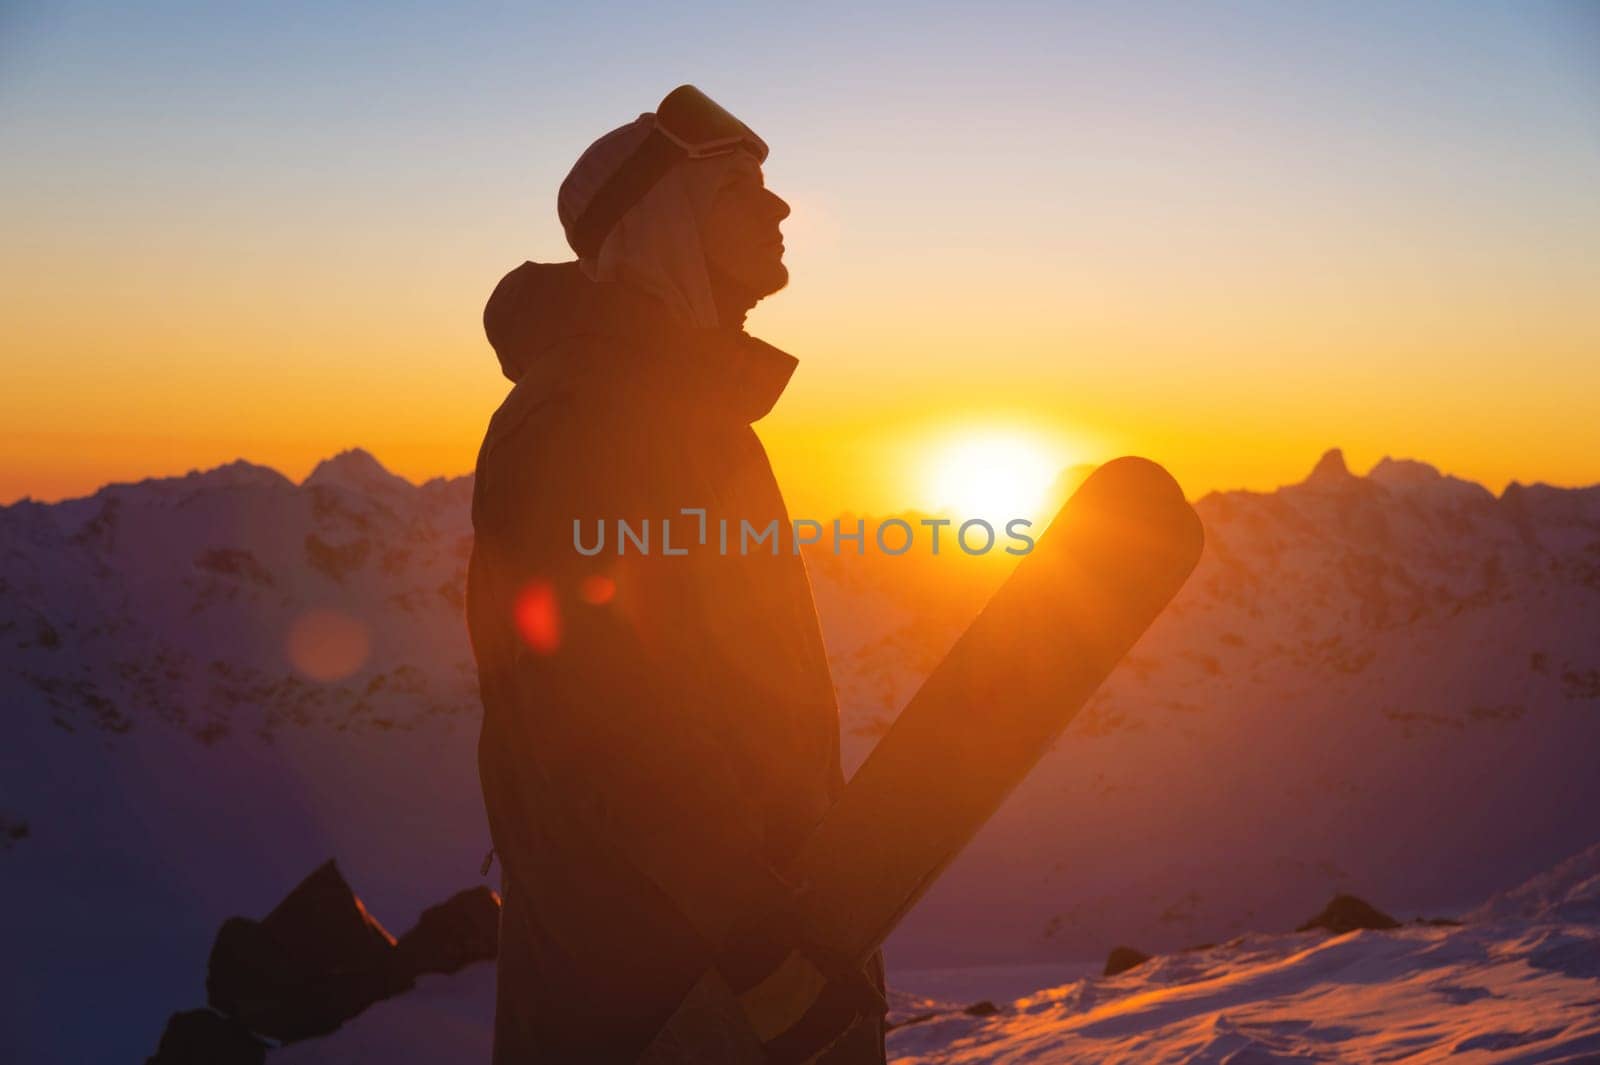 silhouette of a skier with skis standing on a slope at sunset against a mountain range. sportsman portrait by yanik88